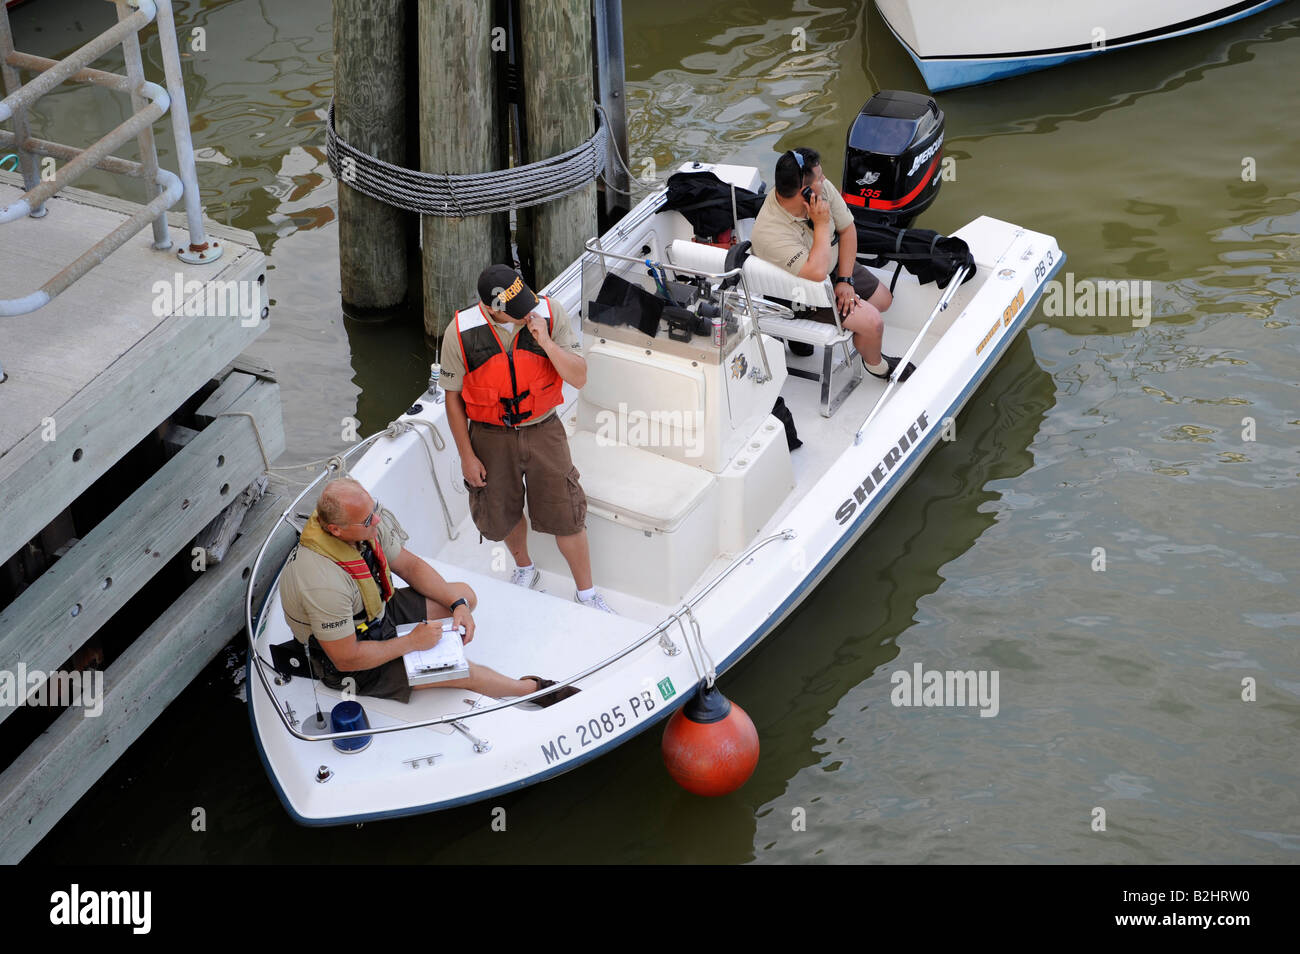 Sheriff deputies patrol on the water in a boat Stock Photo